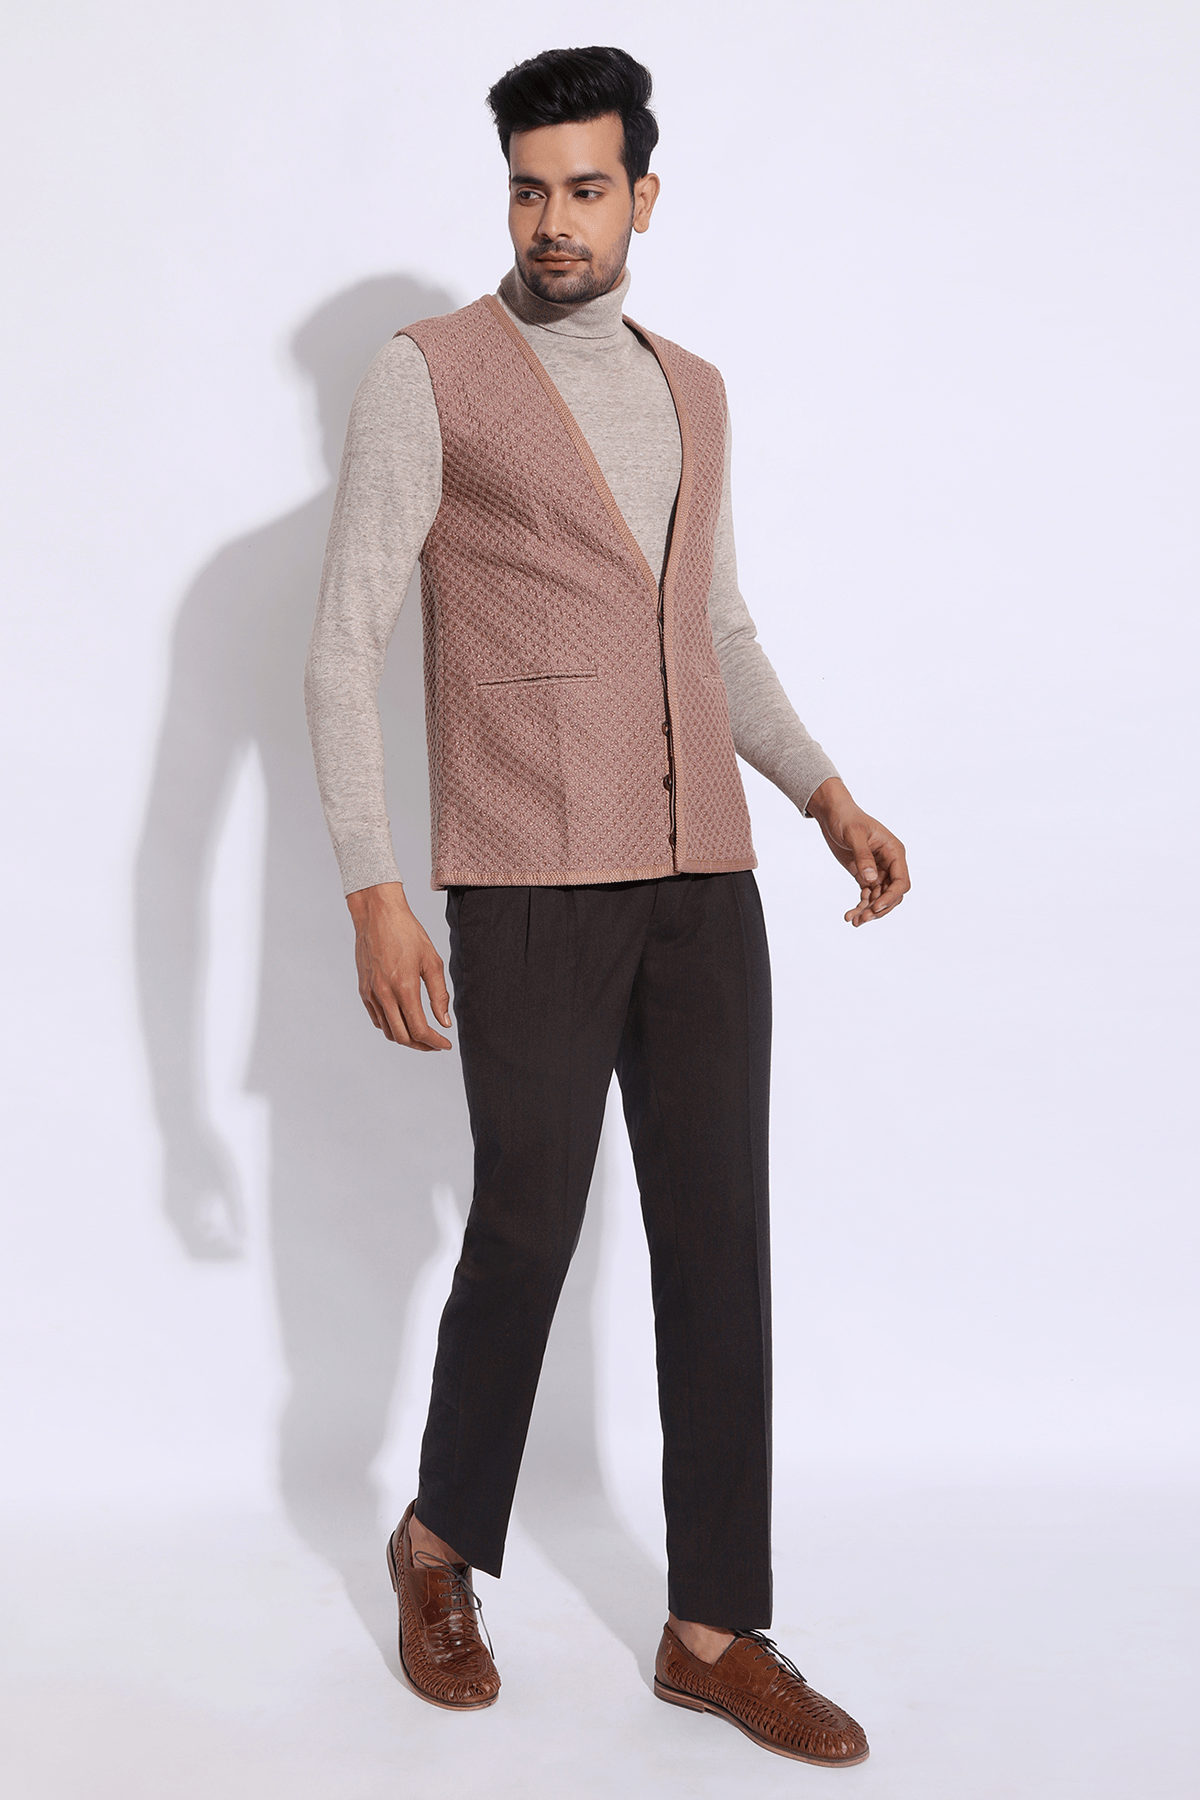 Beige textured long waist coat jacket with beige polo neck and brown trousers - Kunal Anil Tanna